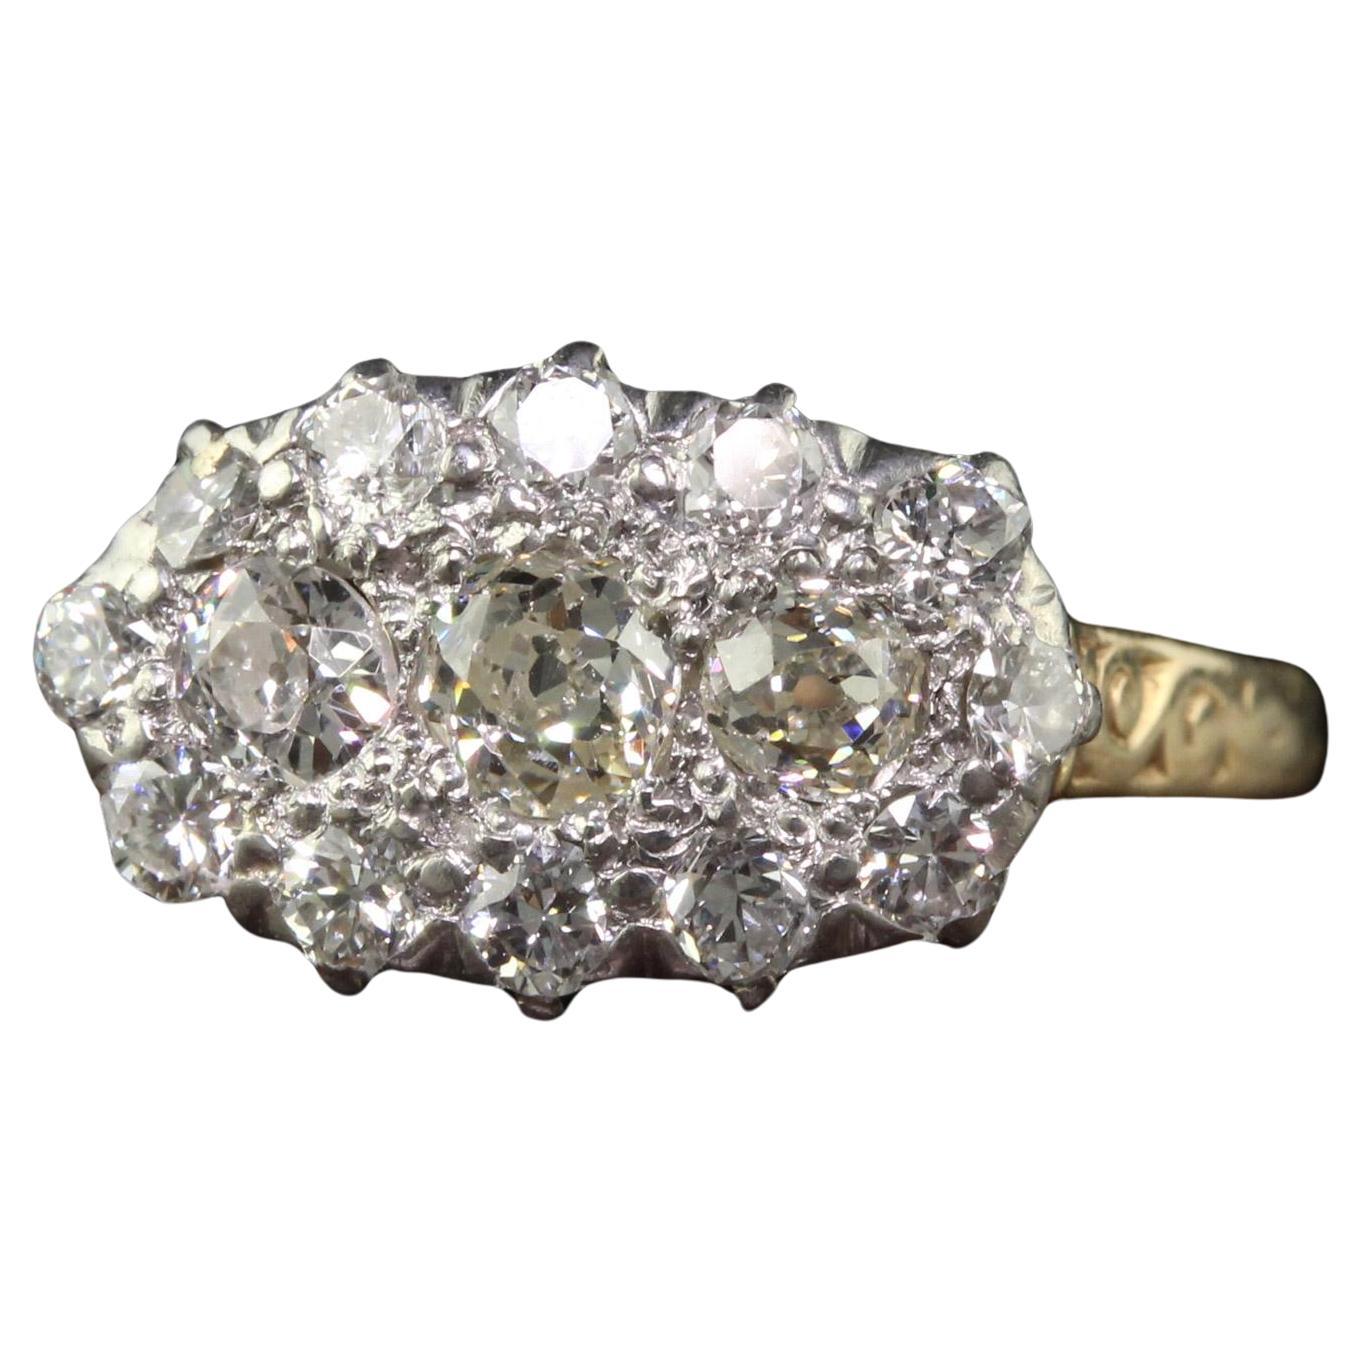 Antique Edwardian 14K Yellow Gold Old Mine Cut Diamond Cluster Ring